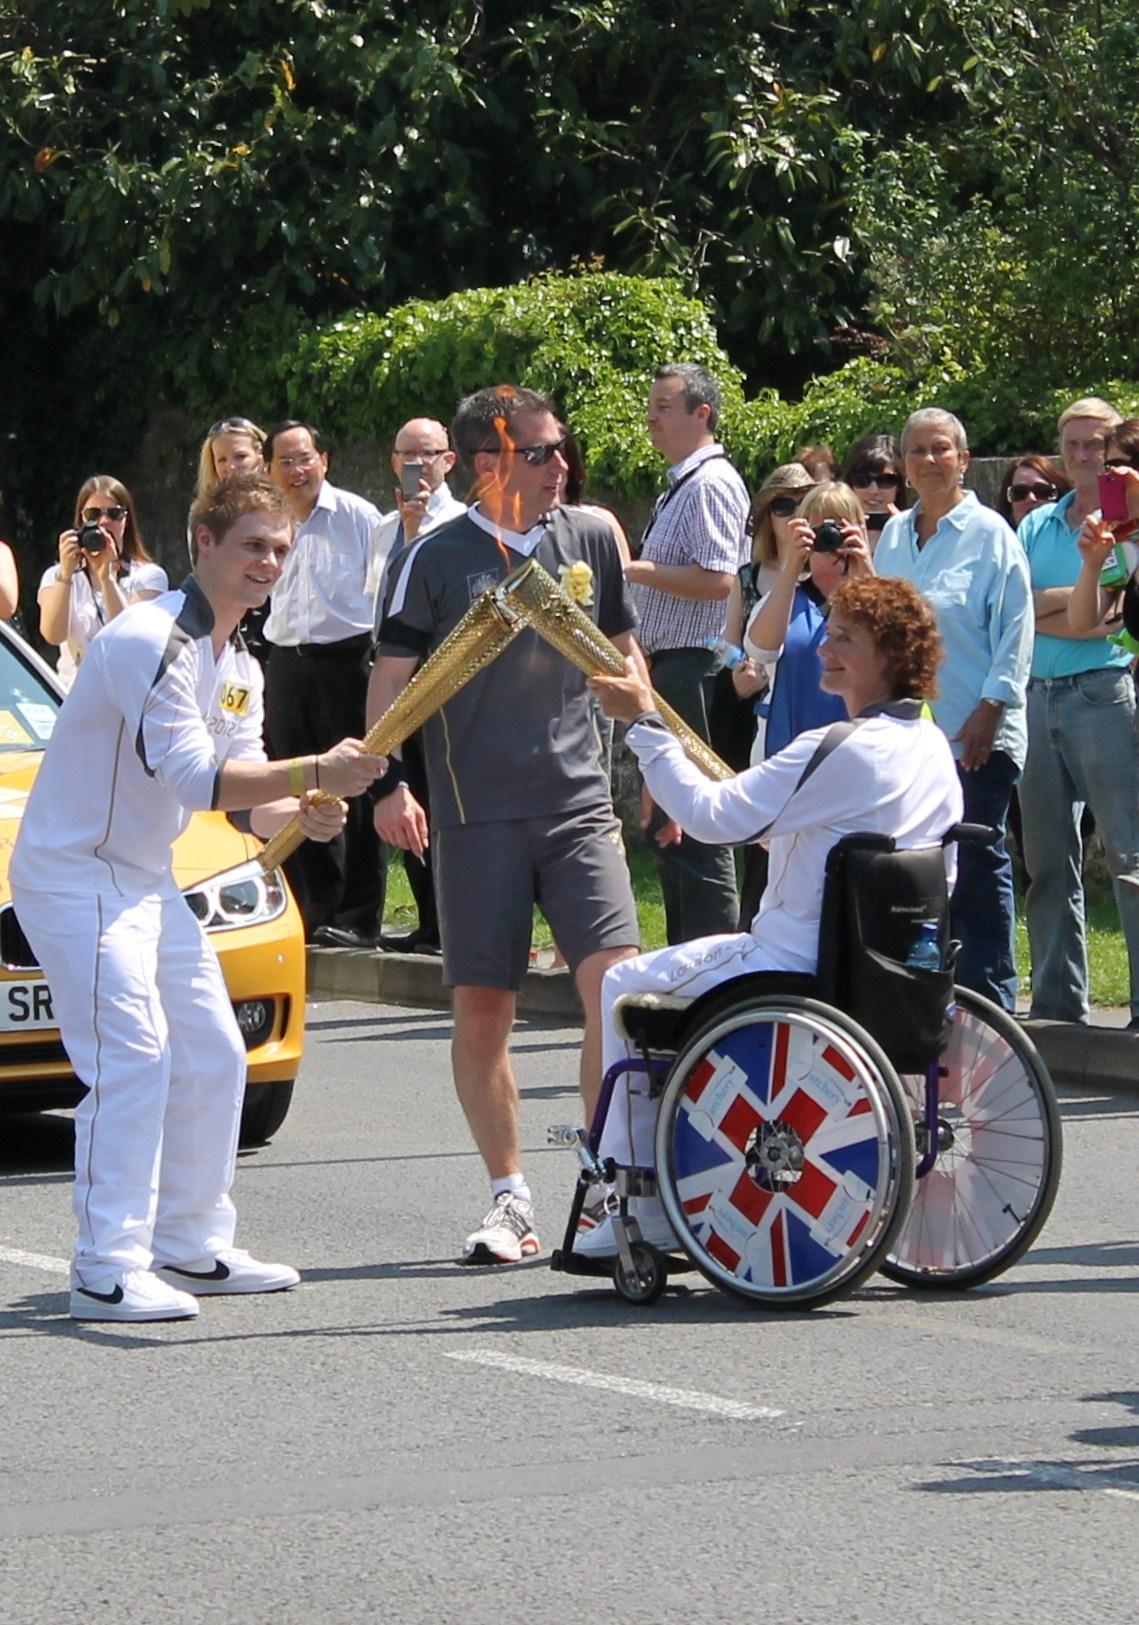 Your flame to fame. 
Readers' pictures capture memories of the Olympic Torch in town. : Aaren Smith
Age: Seventeen
Education: New College, Student
Location of Photographys taken: Wroughton, Swindon.
